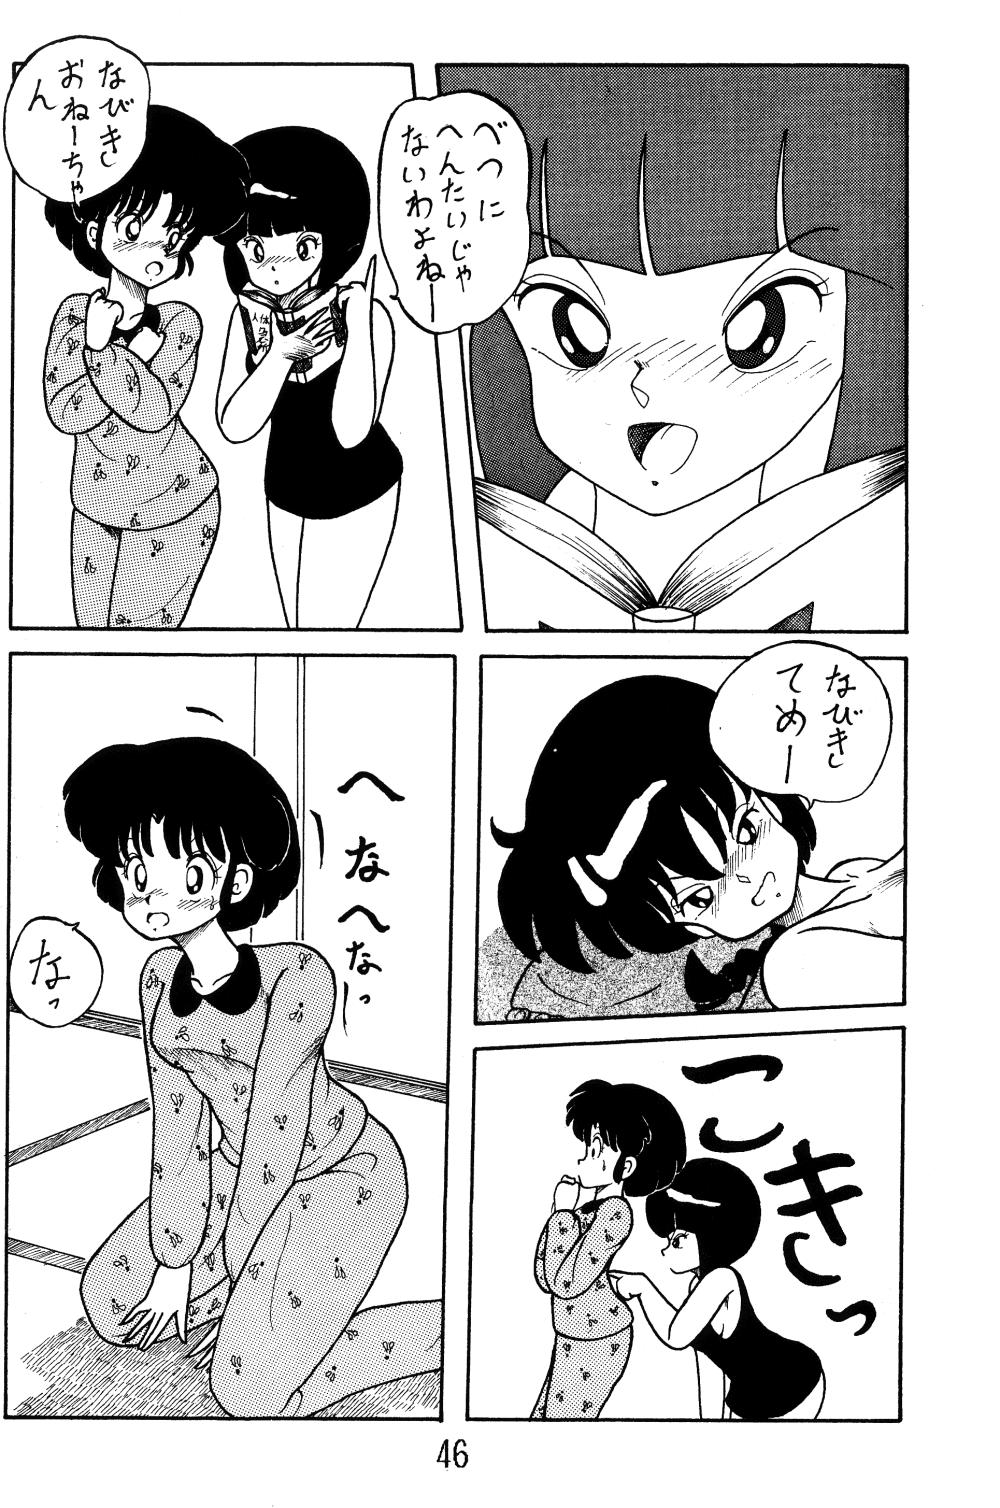 NOTORIOUS Ranma 1/2 Special 44